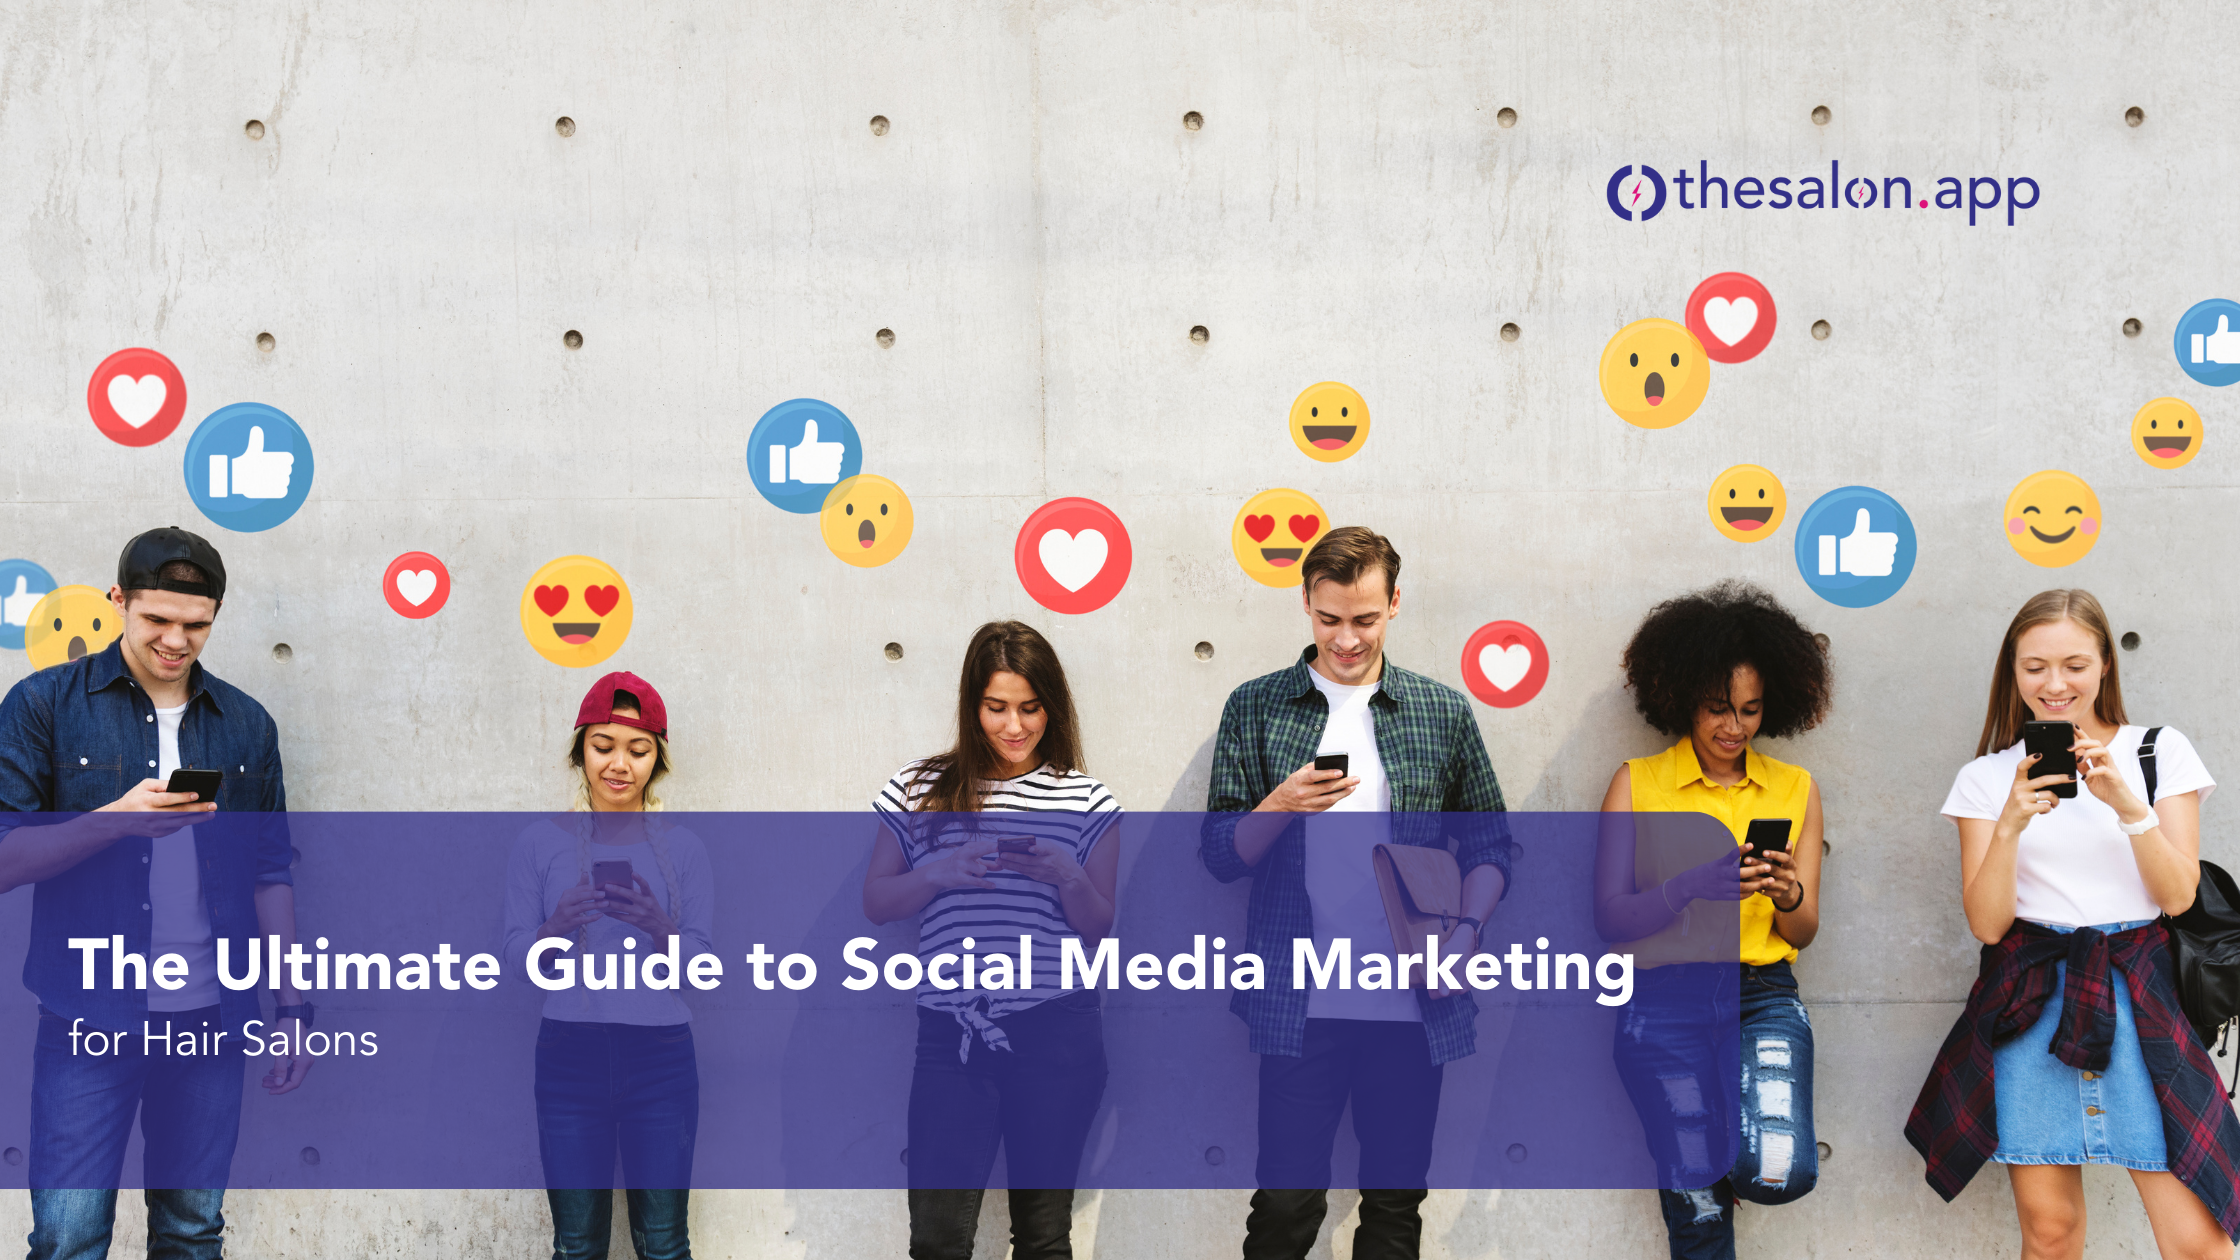 The ultimate guide to social media marketing for hair salons